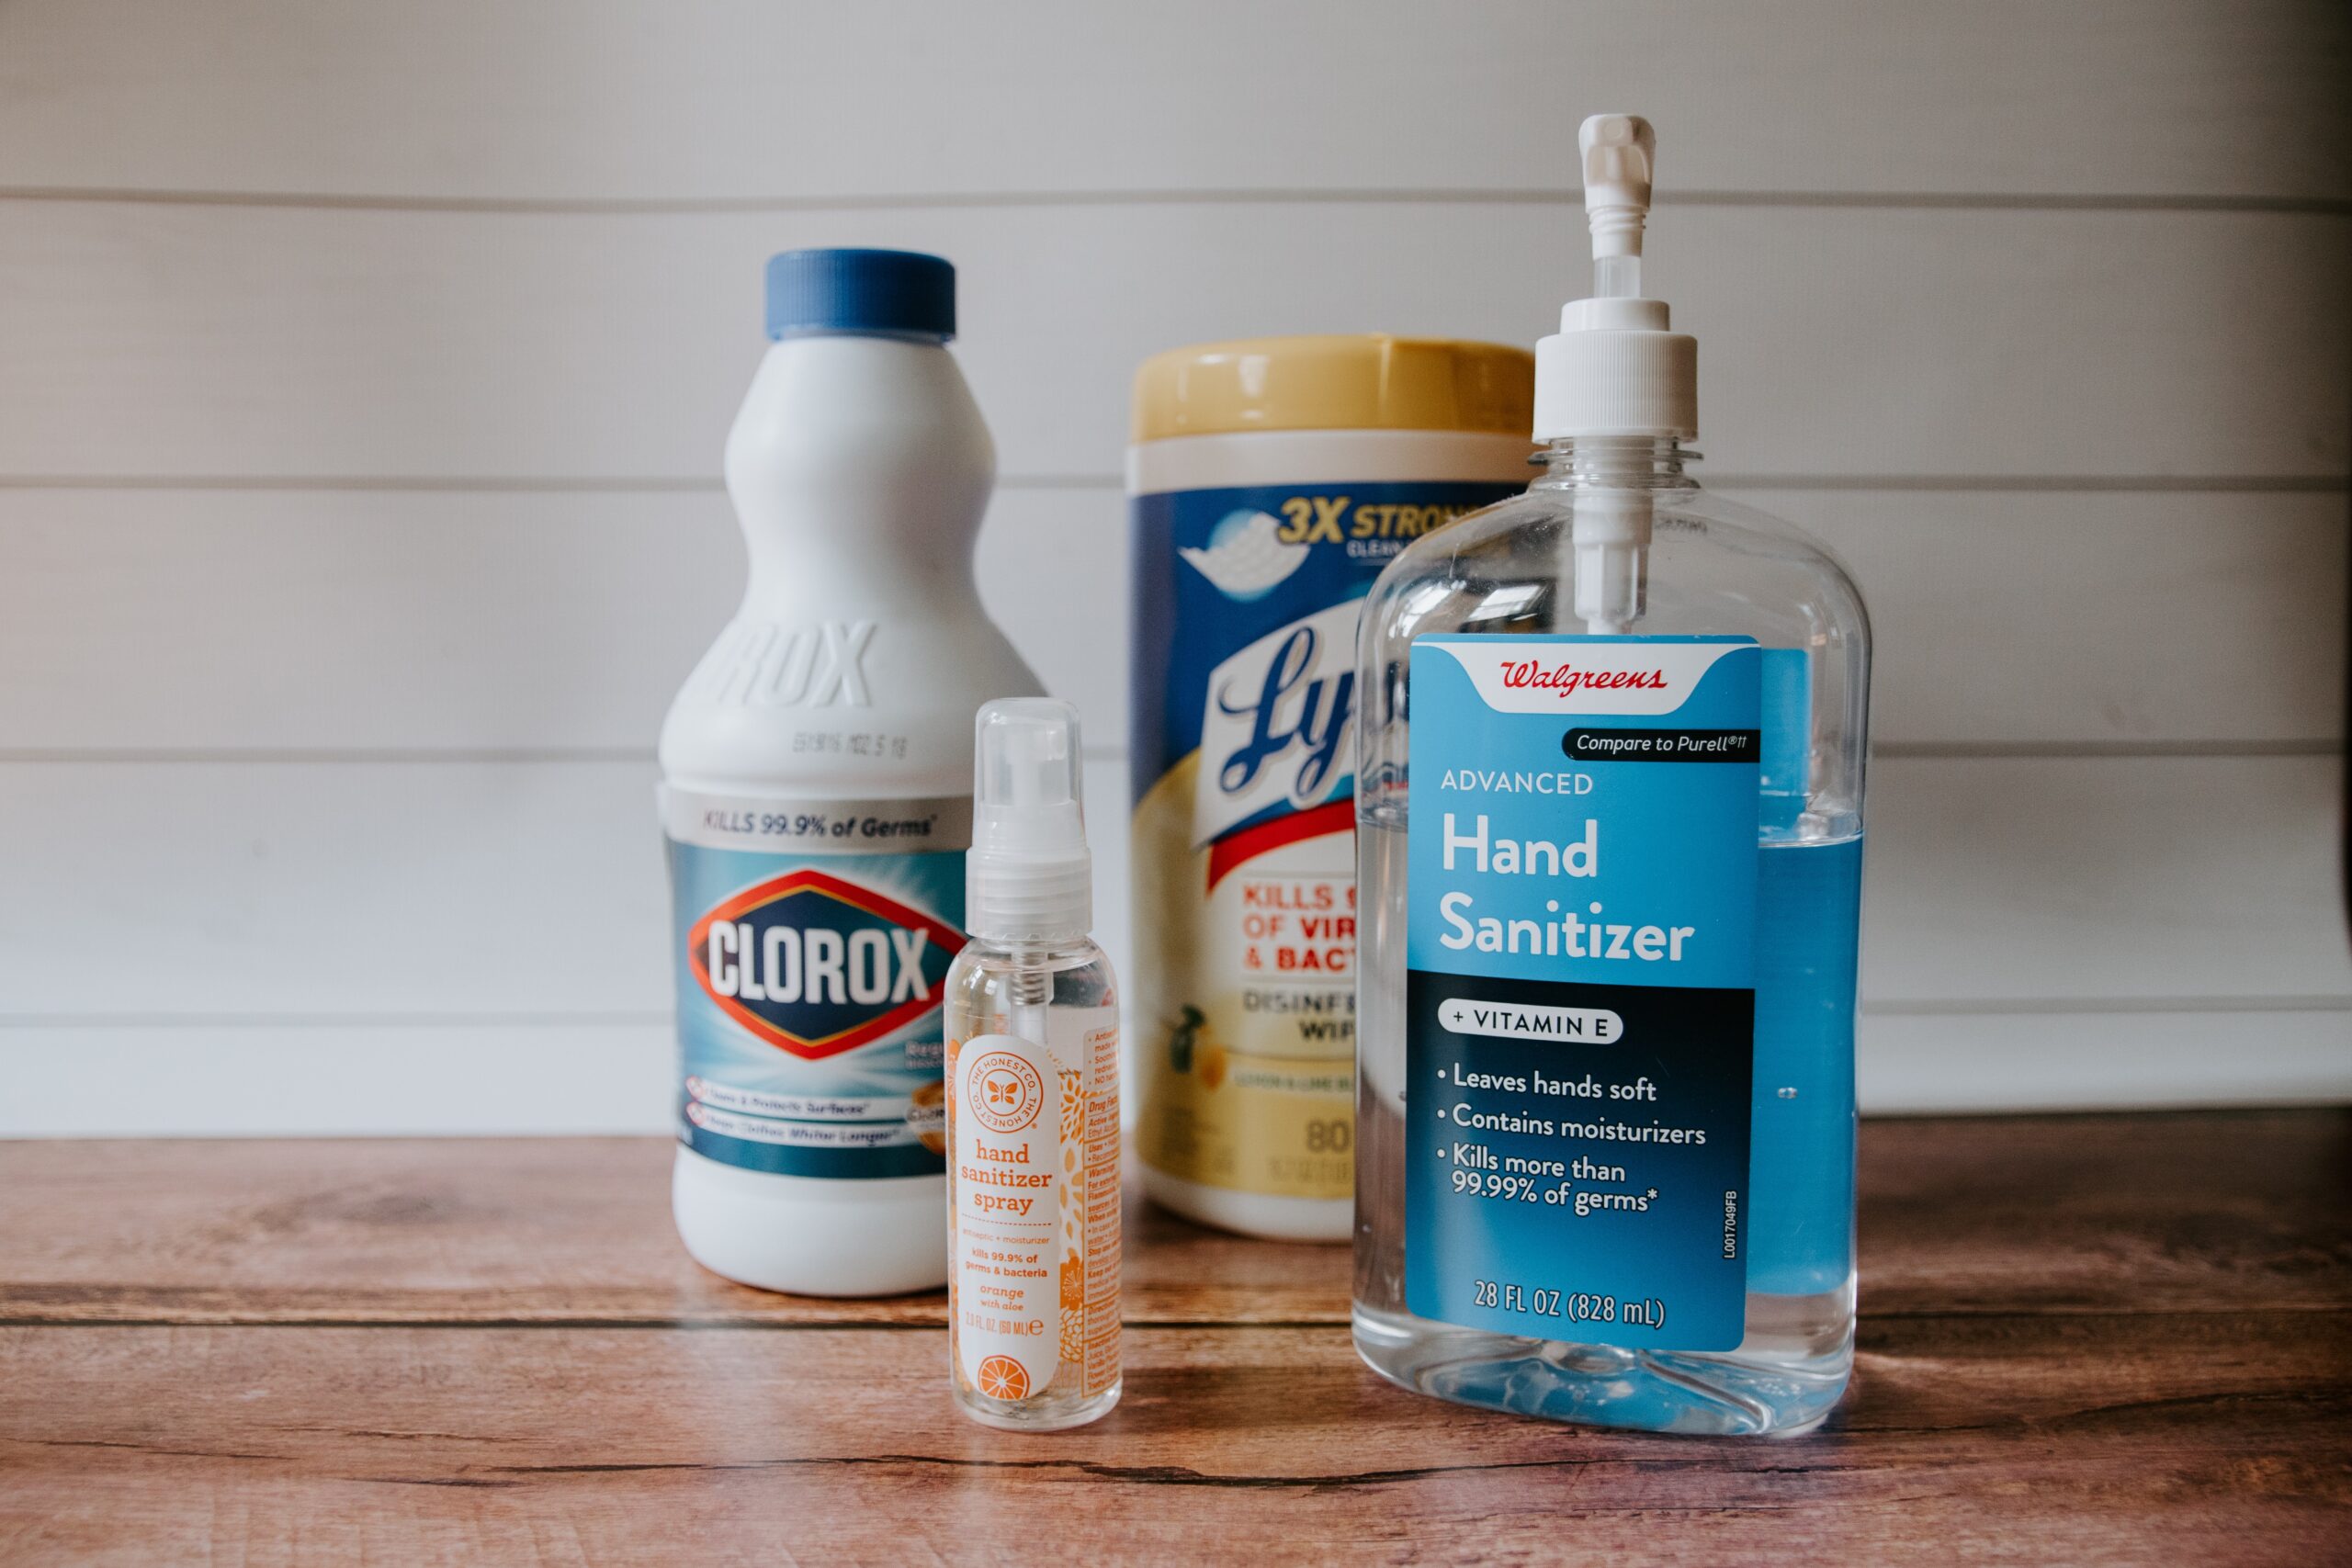 Does bleach kill bed bugs? What about bed bug eggs? It can, but the risk factor in using bleach is that you may not be able to kill every single bed bug. Direct contact is key for this method. Pictured: Bleach and Bleach products.